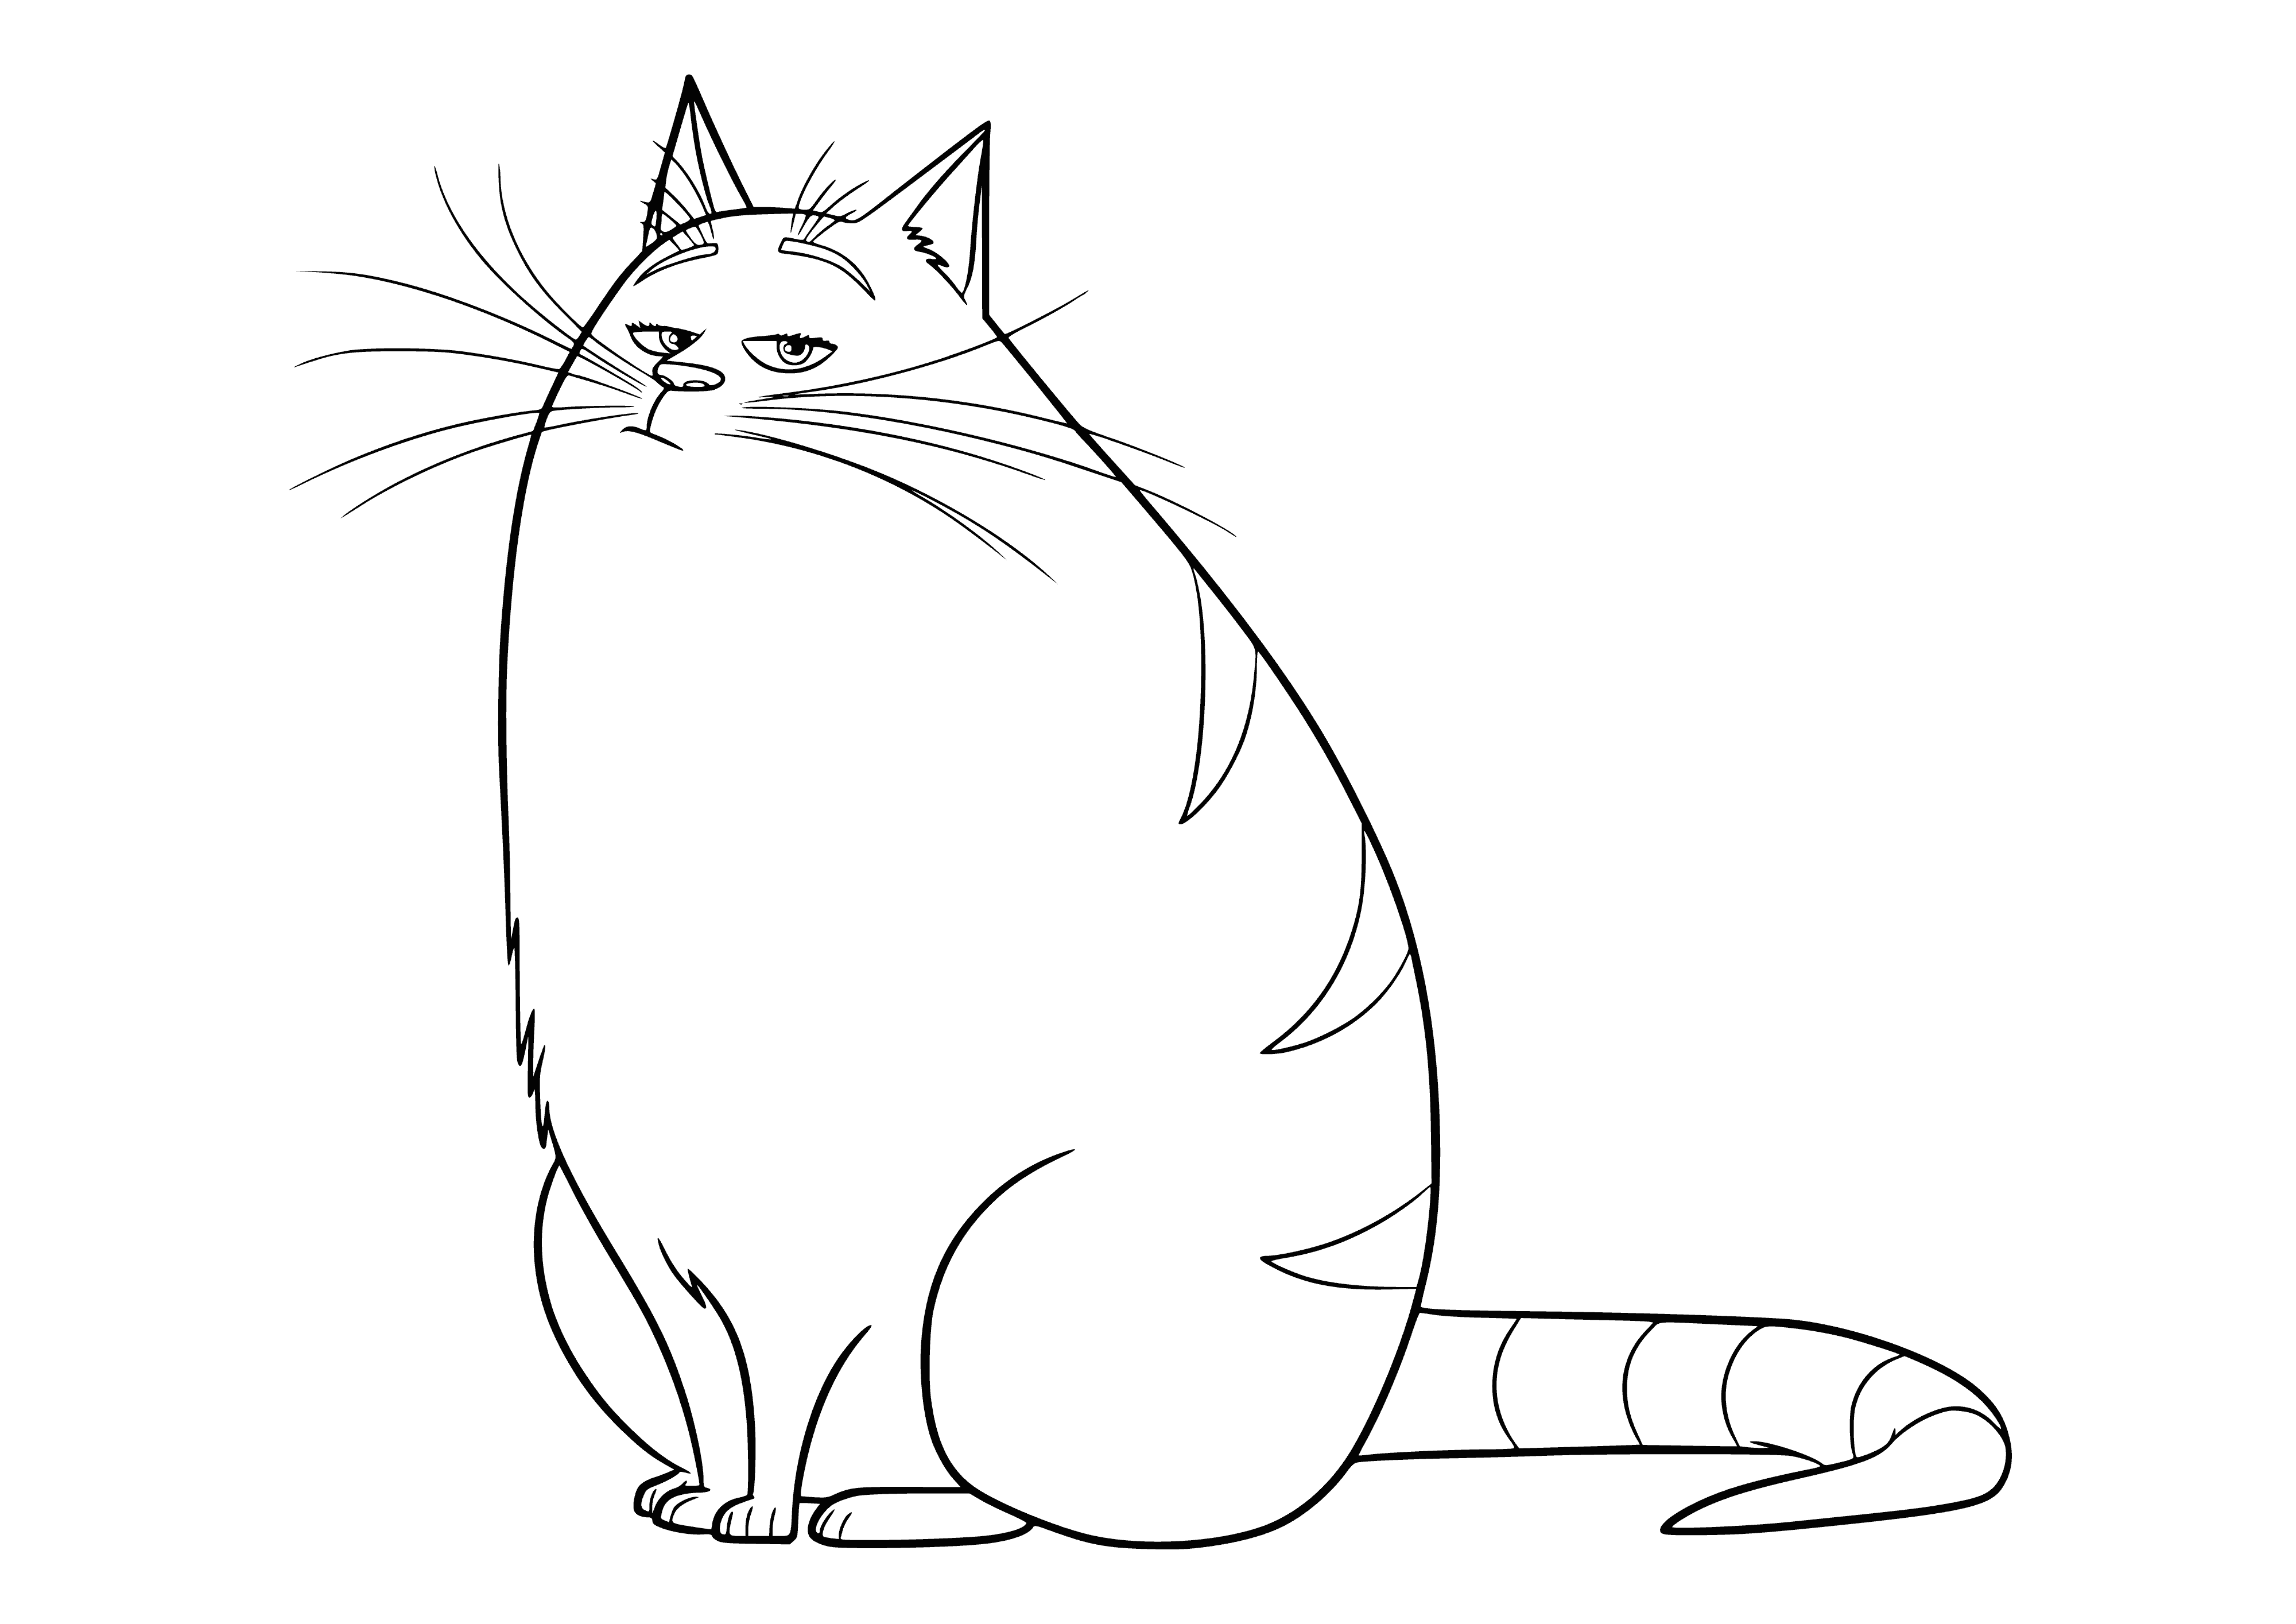 Chloe the cat coloring page